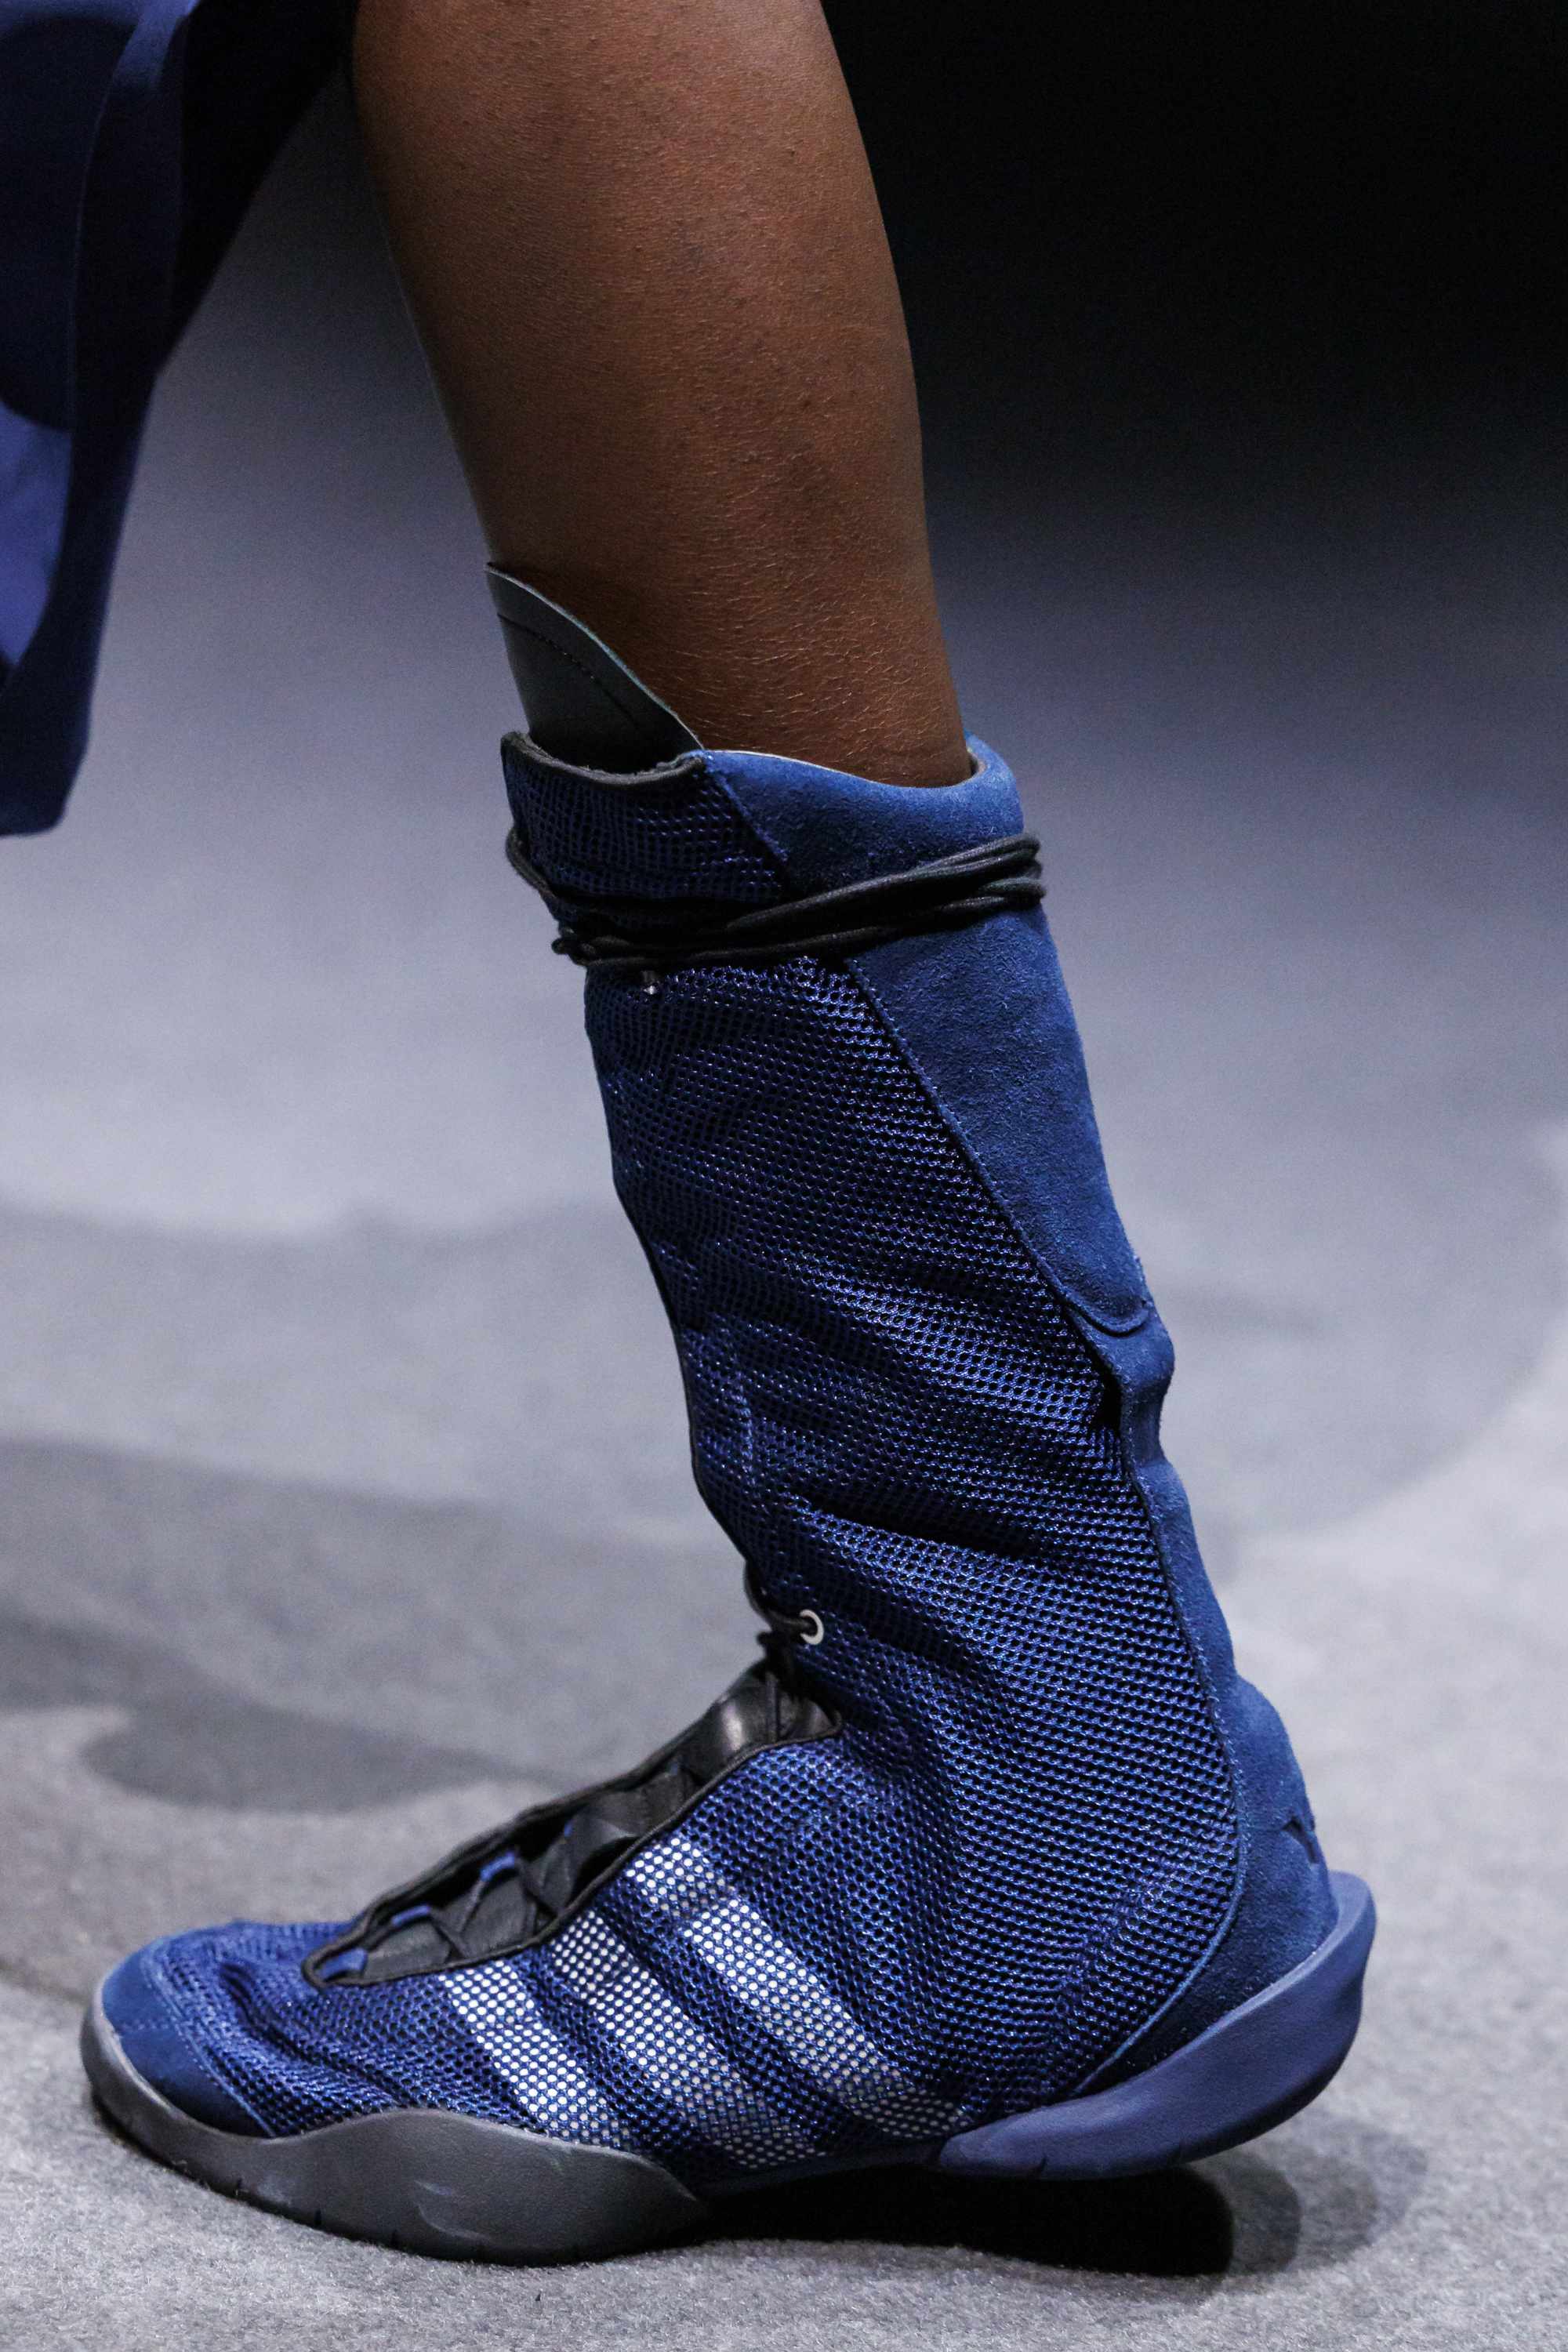 adidas Y3's Spring/Summer 2025 shoes and clothes at Paris Fashion Week